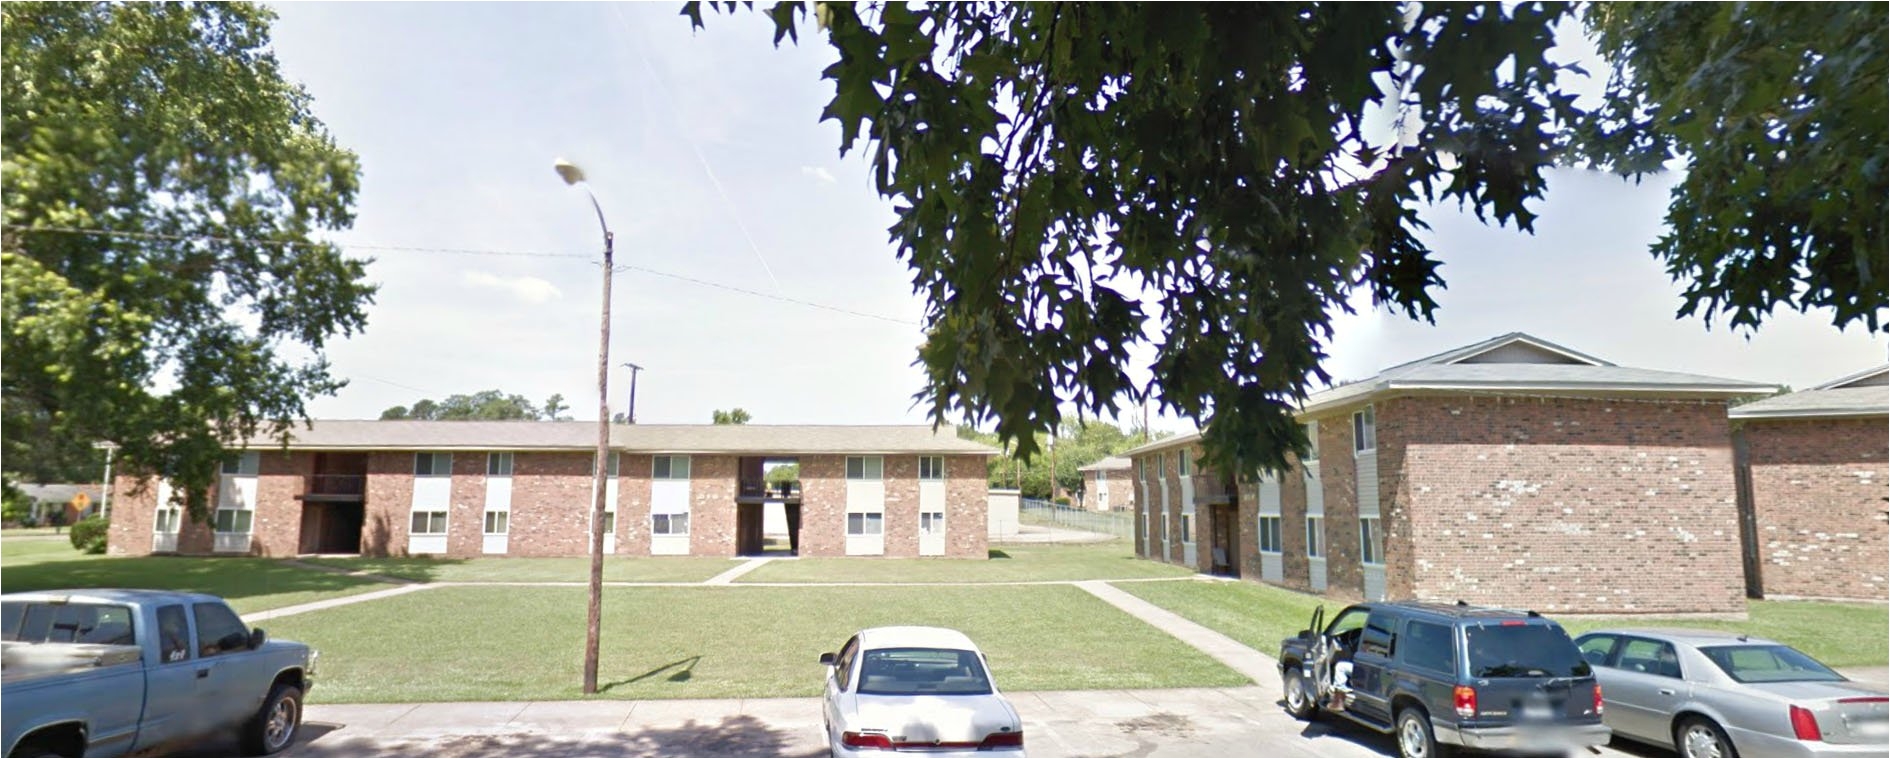 one bedroom apartments in starkville ms cotton district reed place